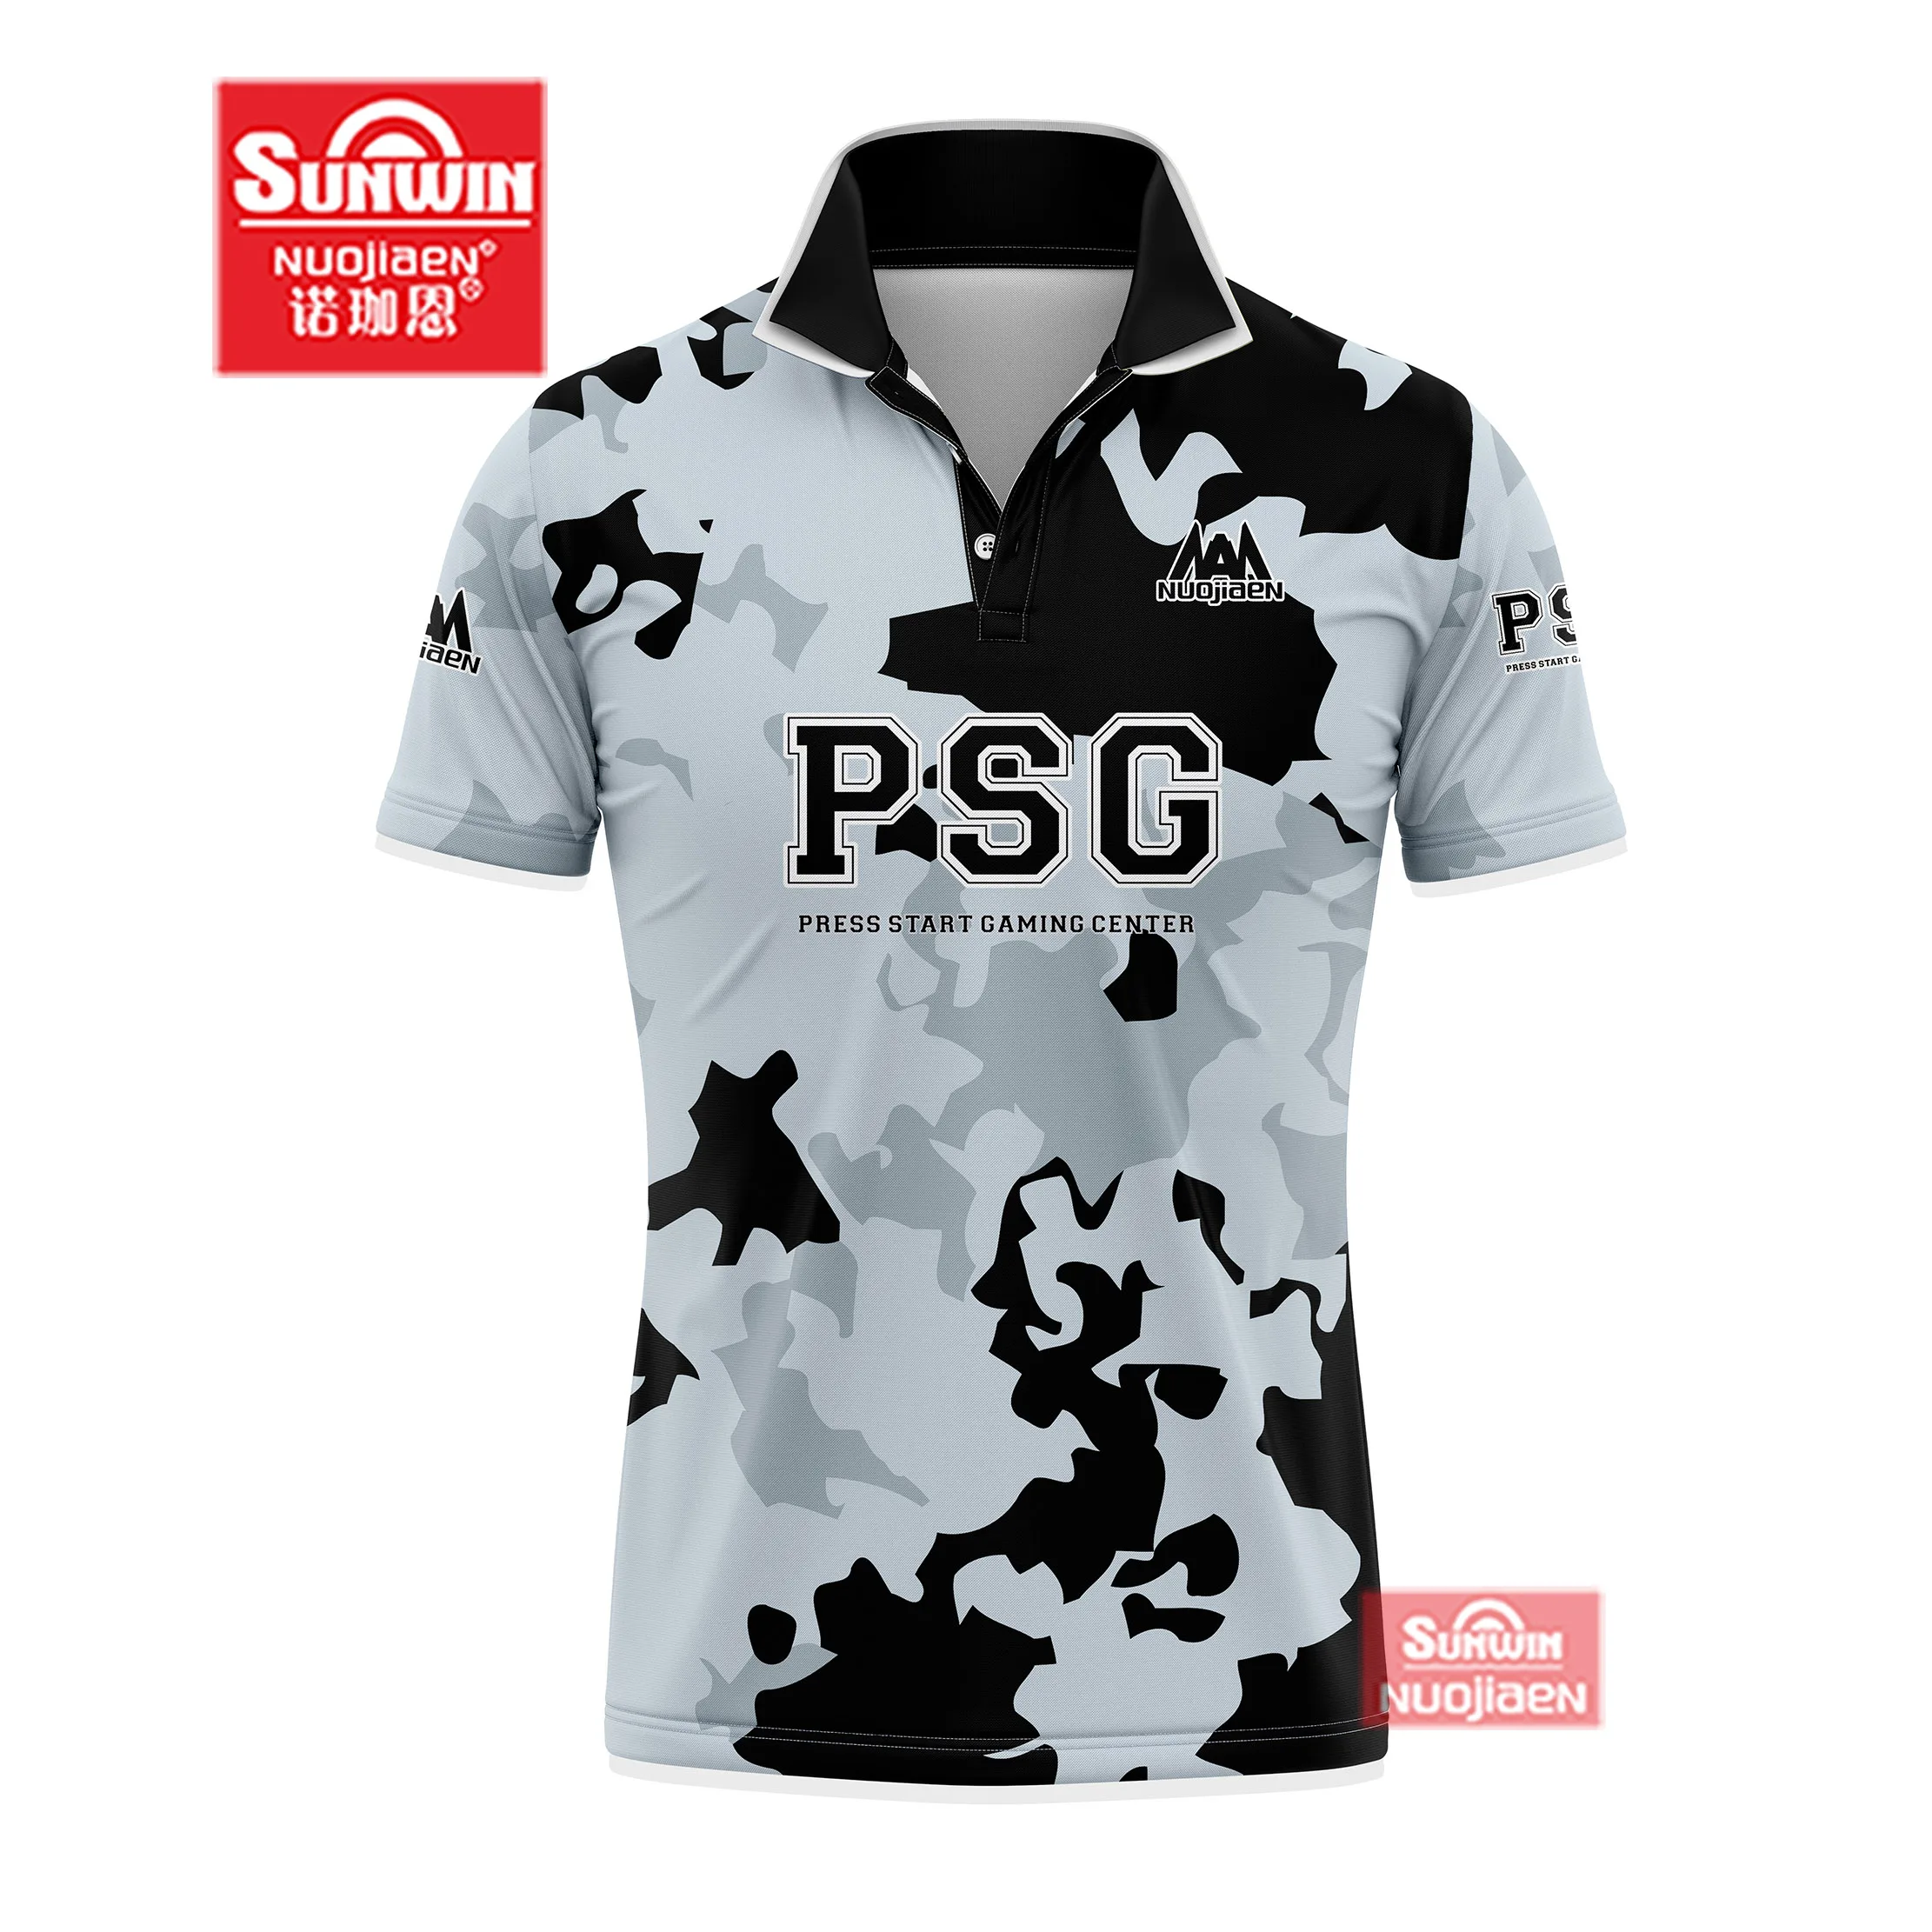 Jersey Sublimation and Printing Design. Graphic by TT DESIGNER